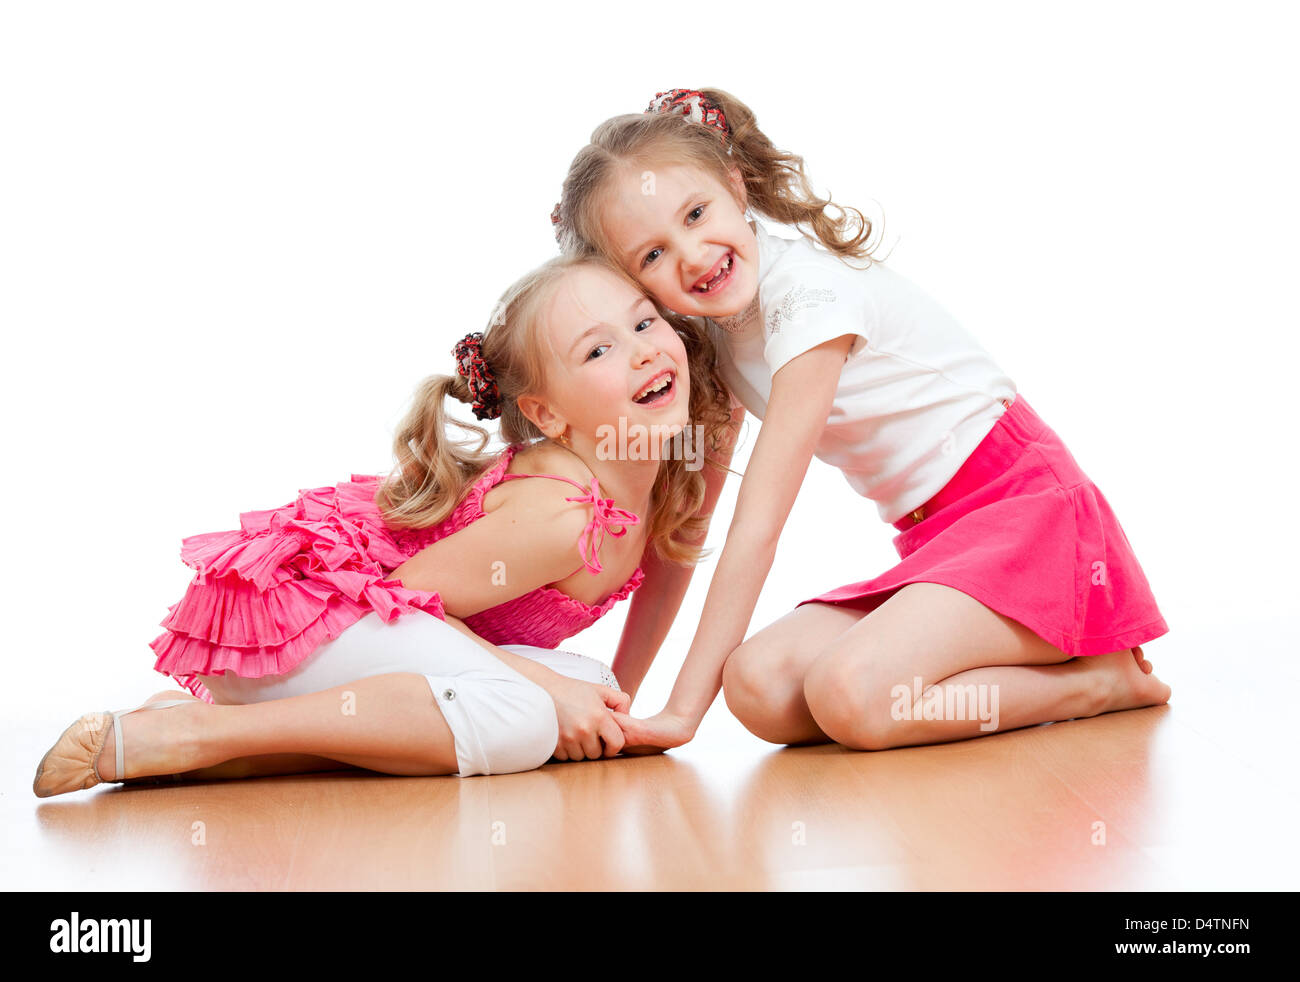 Two girls are playing together. Isolated over white background Stock Photo